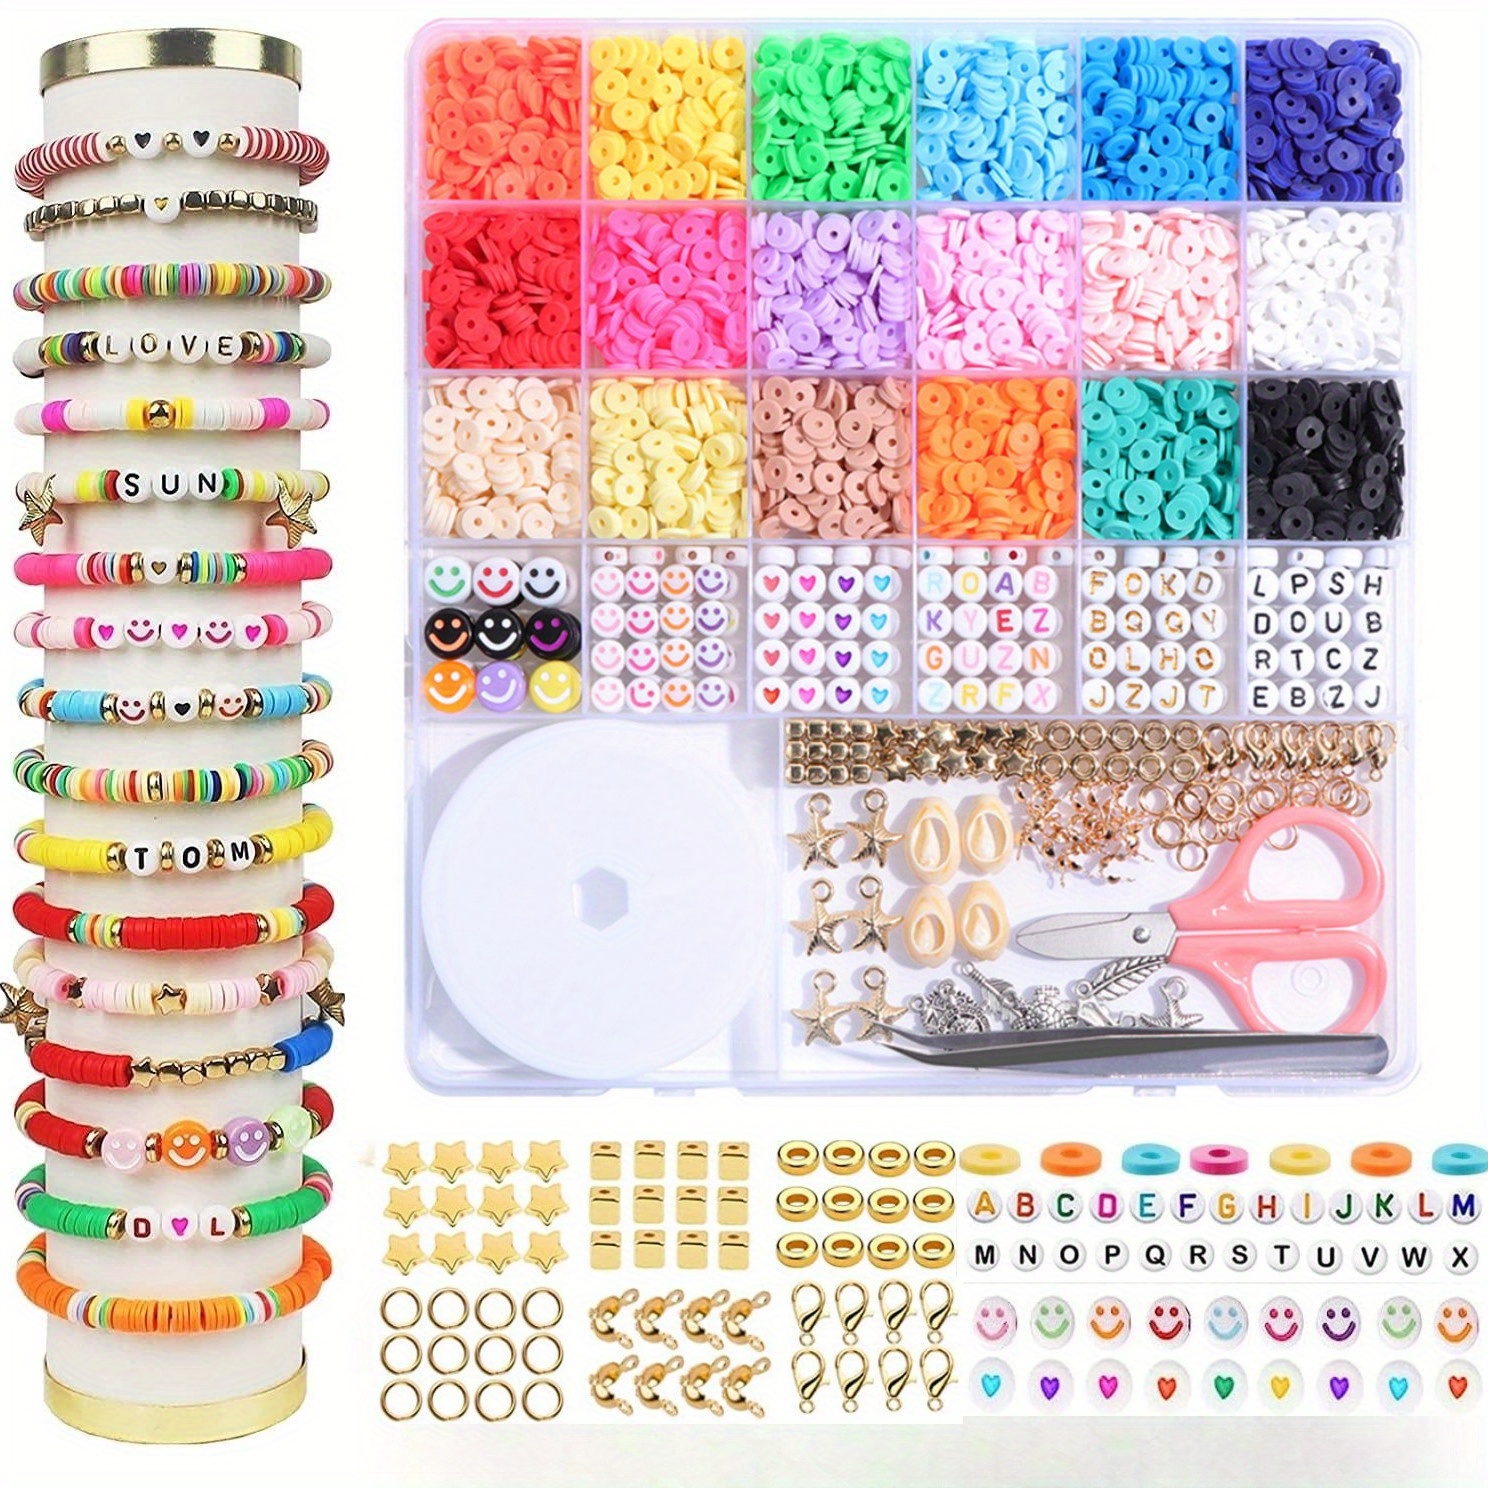 KESIYI 5500 Pcs-Crafts for Girls Ages 8-12, Clay Beads for